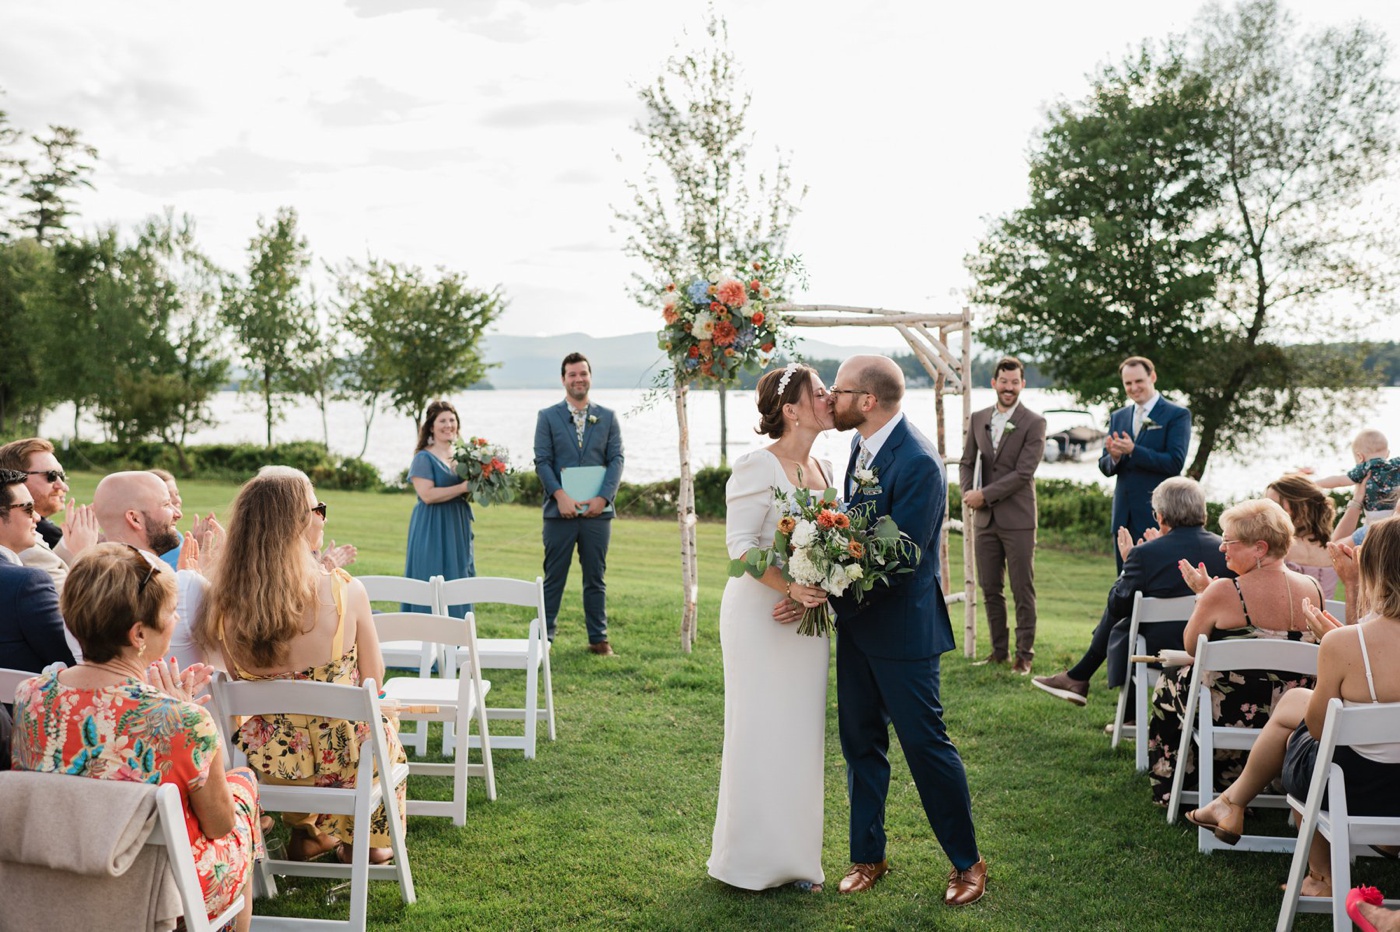 Outdoor wedding ceremony on the Palazzo Field at Brewster Academy